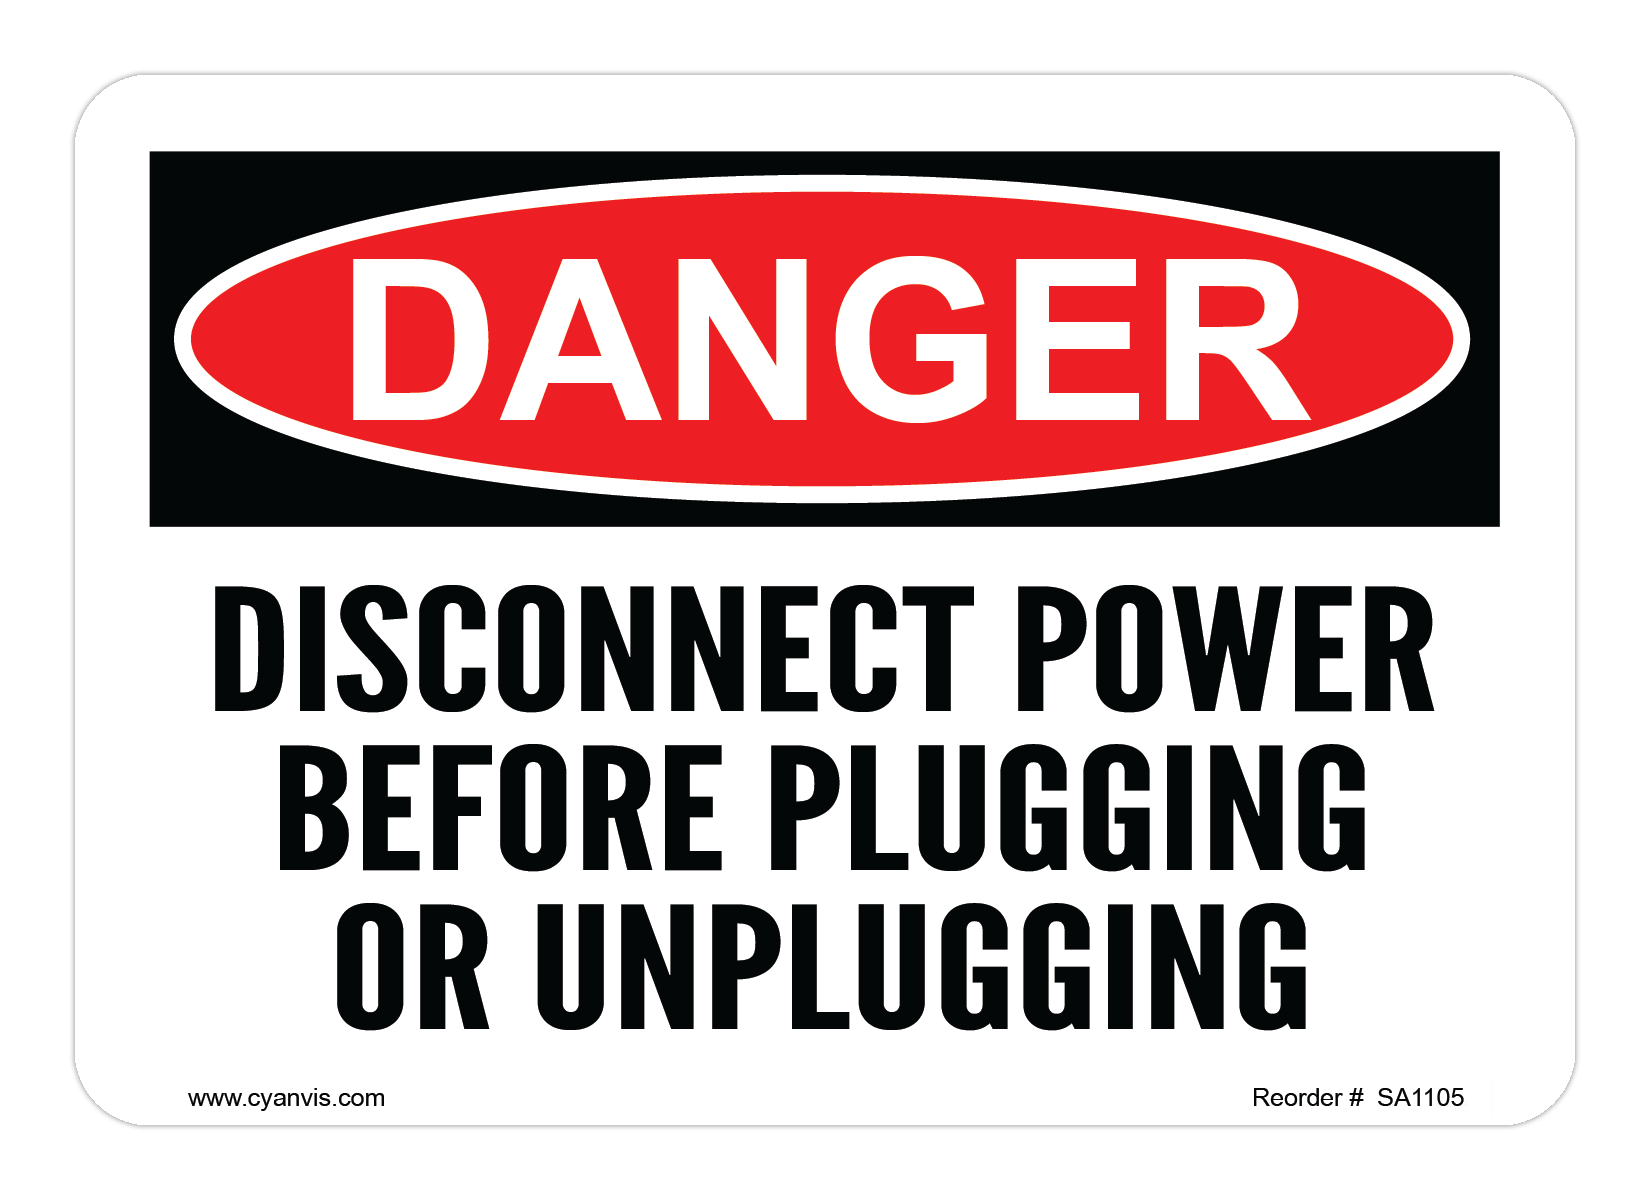 Safety Sign: Danger - DISCONNECT POWER BEFORE PLUGGING OR UNPLUGGING - CYANvisuals